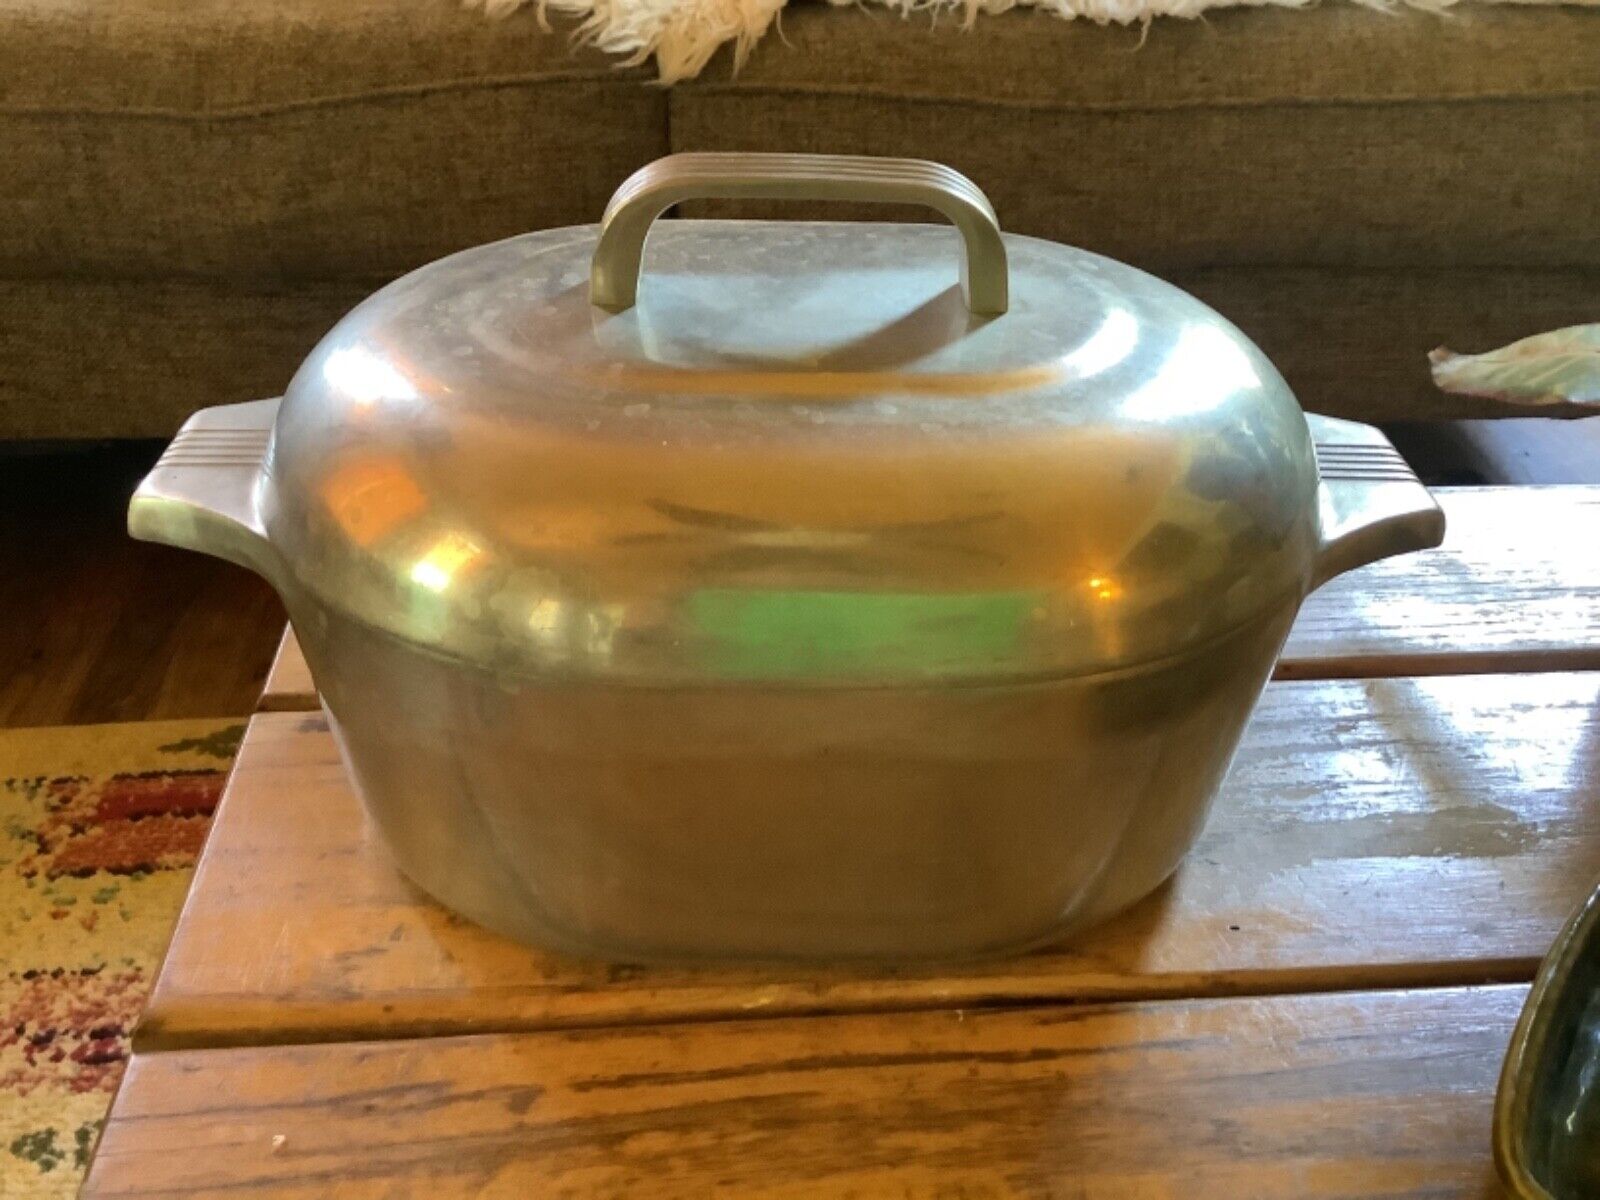 1930's Magnalite Wagner Ware Roaster Used As Cloche for Multi-grain SD  Challah